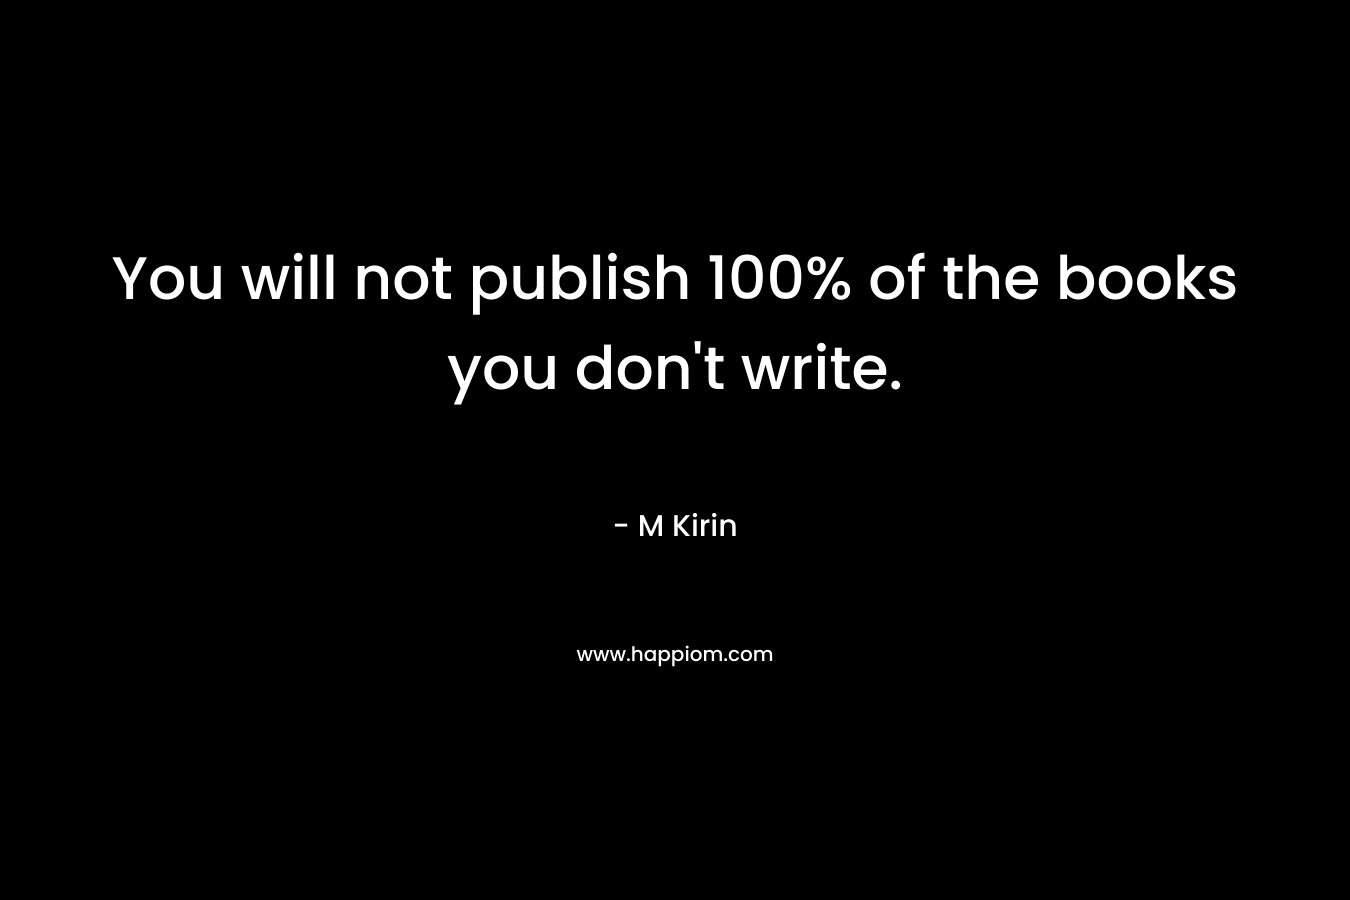 You will not publish 100% of the books you don’t write. – M Kirin